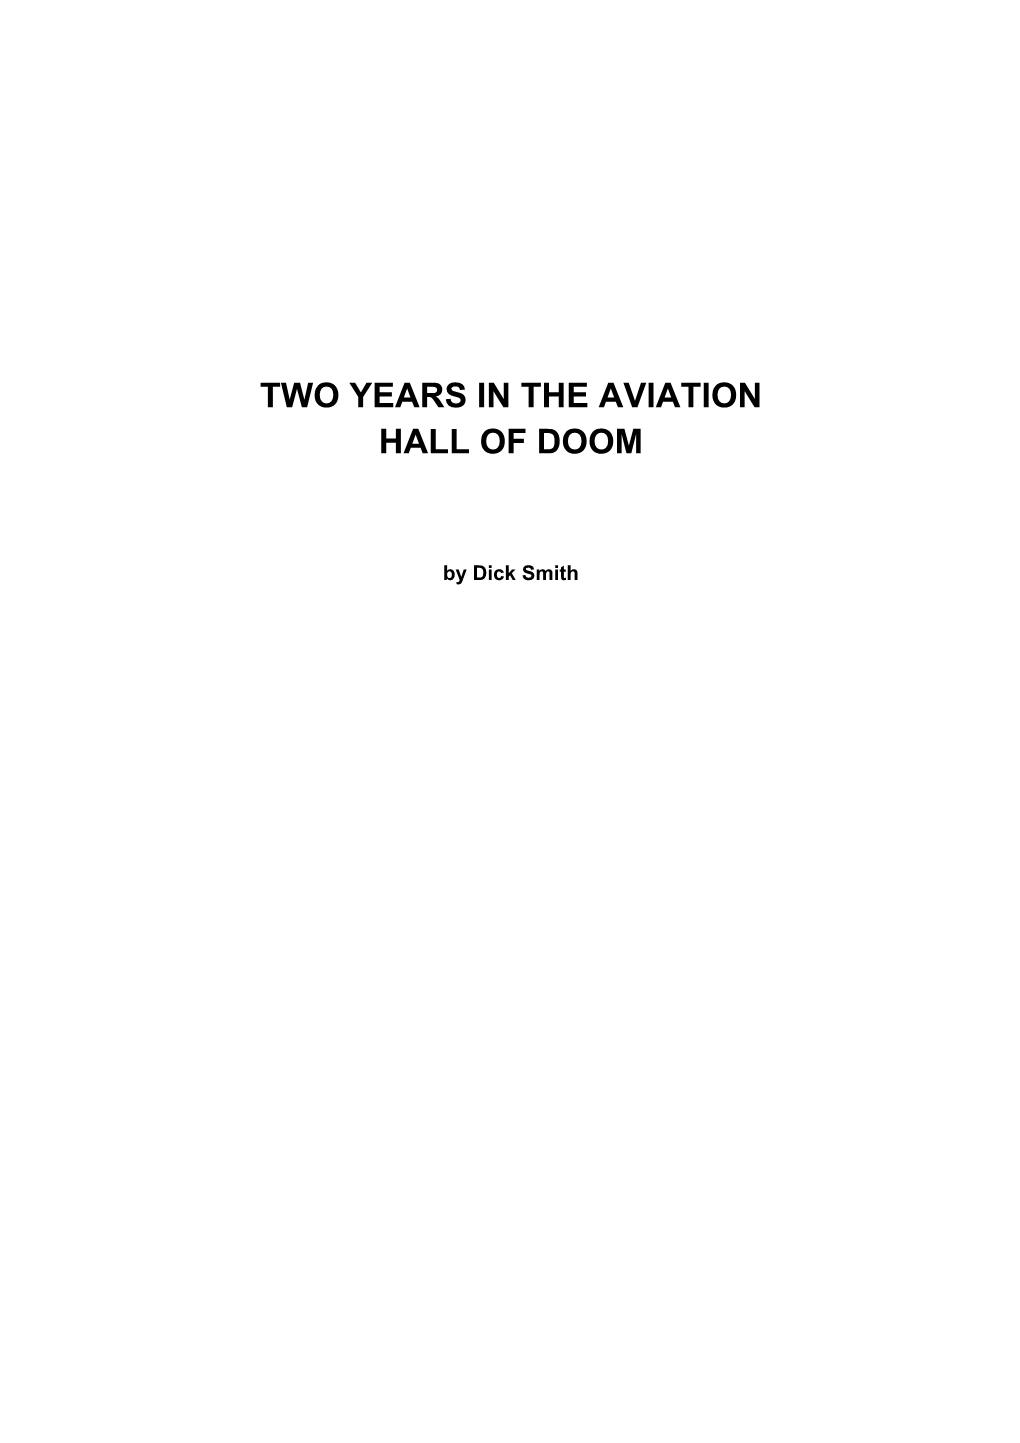 Two Years in the Aviation Hall of Doom